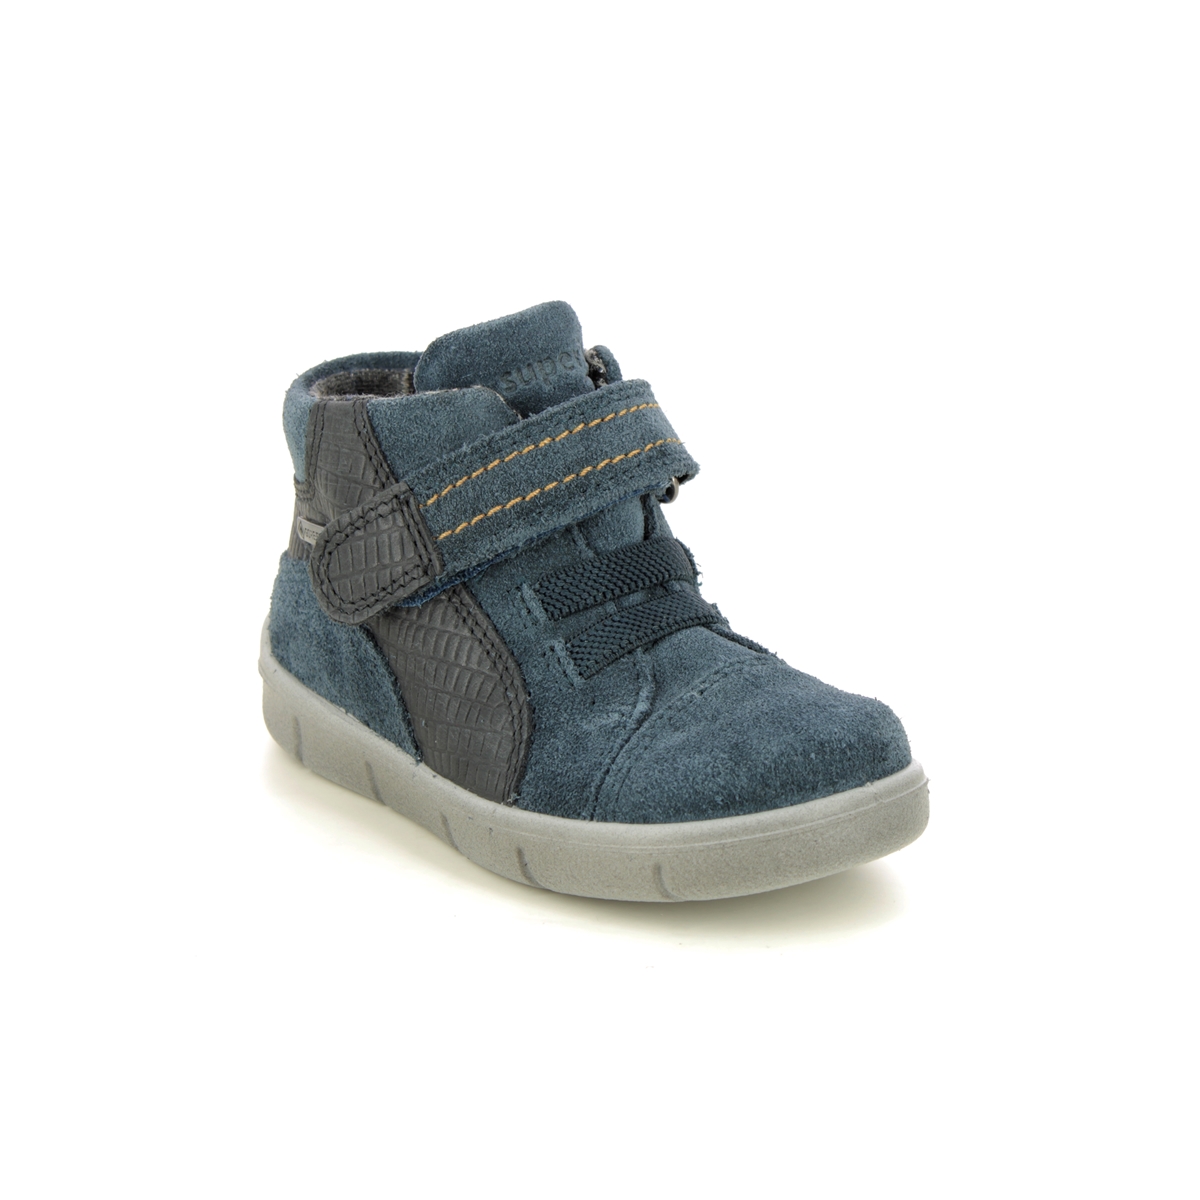 Superfit Ulli Bungee Gtx Blue Suede Kids Toddler Boys Boots 1009429-8000 In Size 23 In Plain Blue Suede For kids